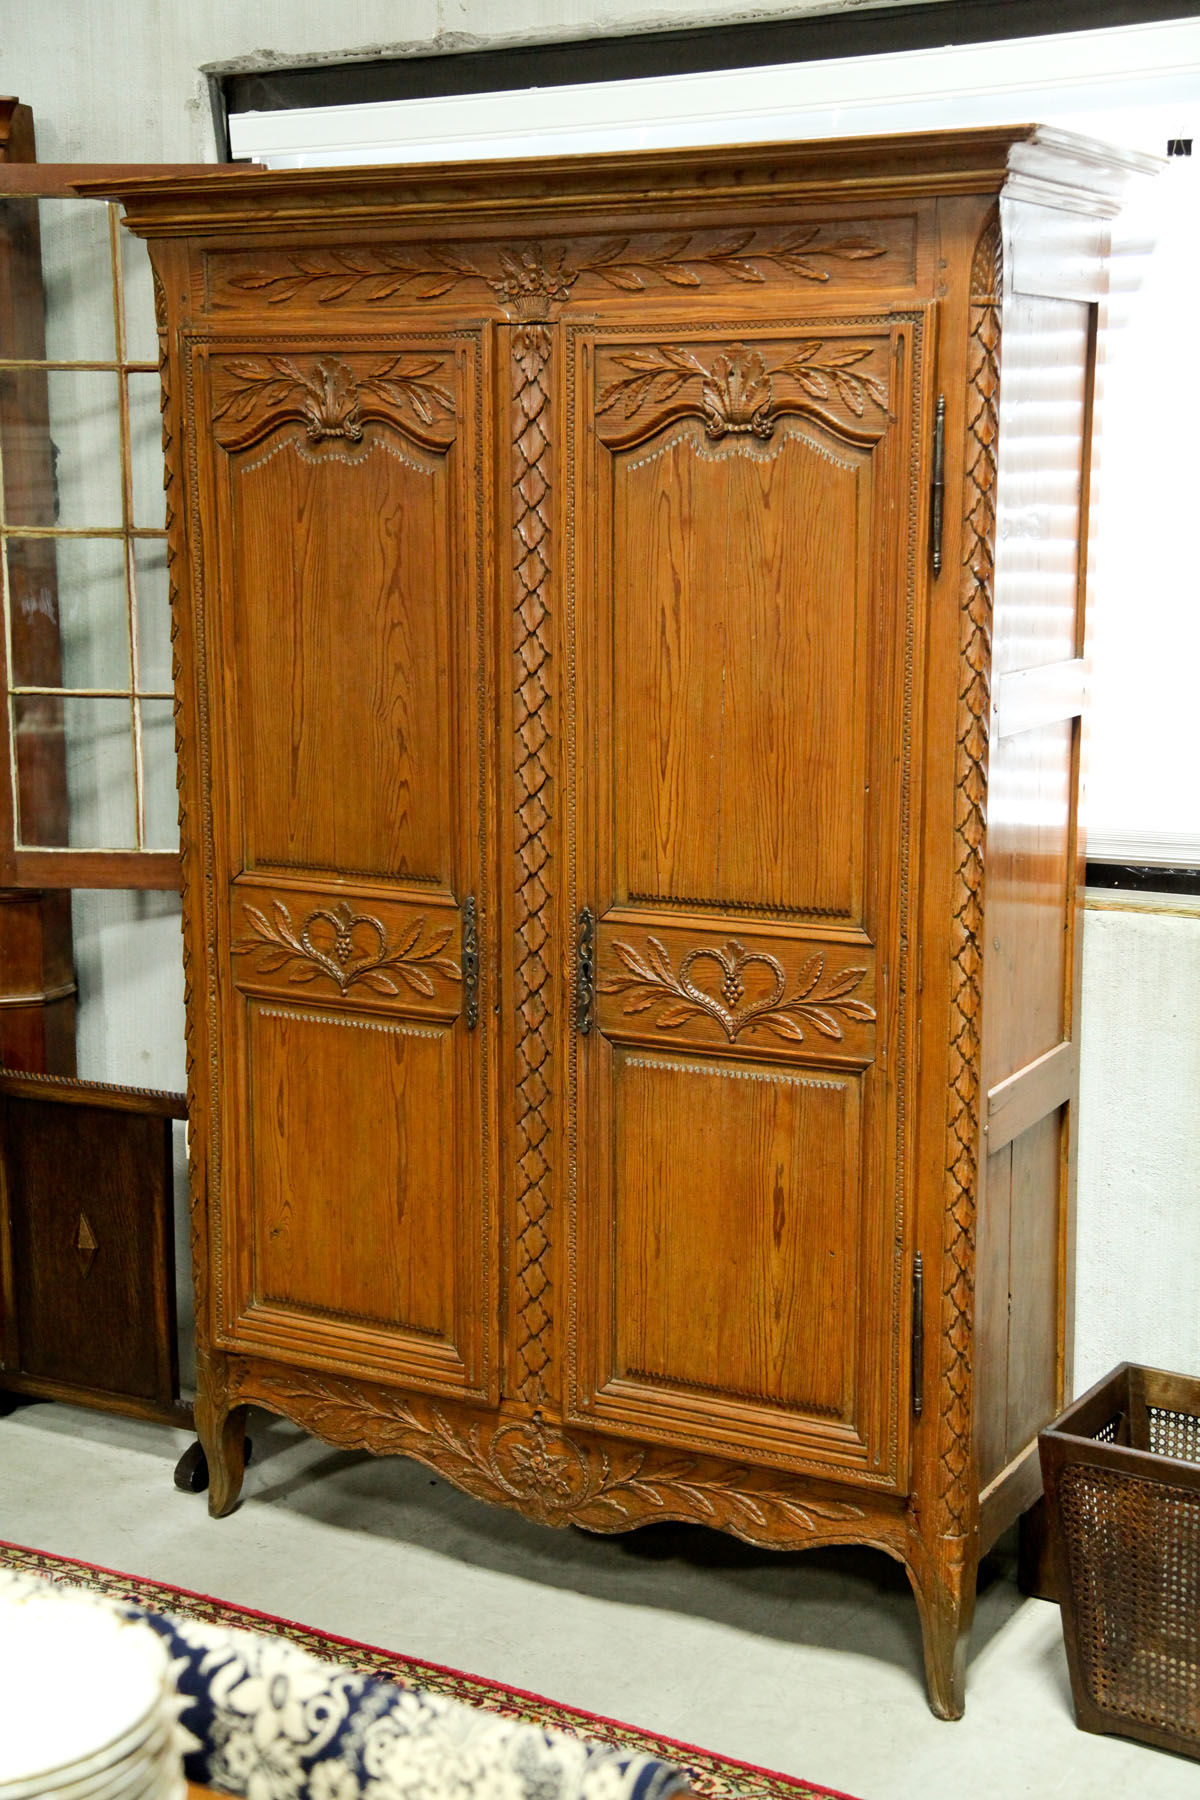 ARMOIRE.  France   early to mid 19th